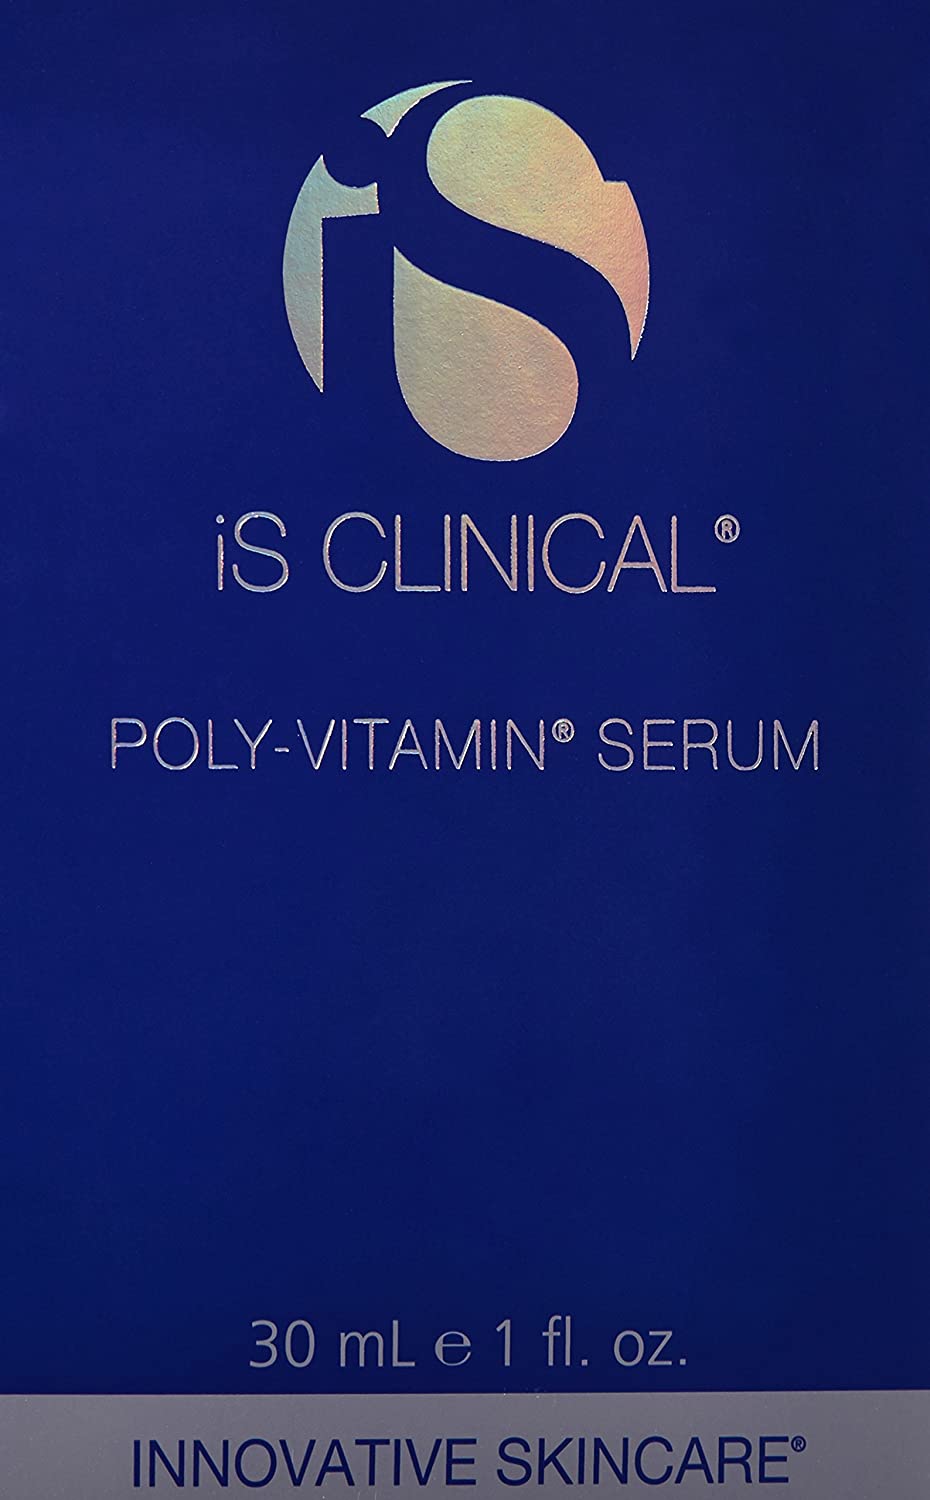 IsClinical Poly-Vitamin Serum - Totality Skincare